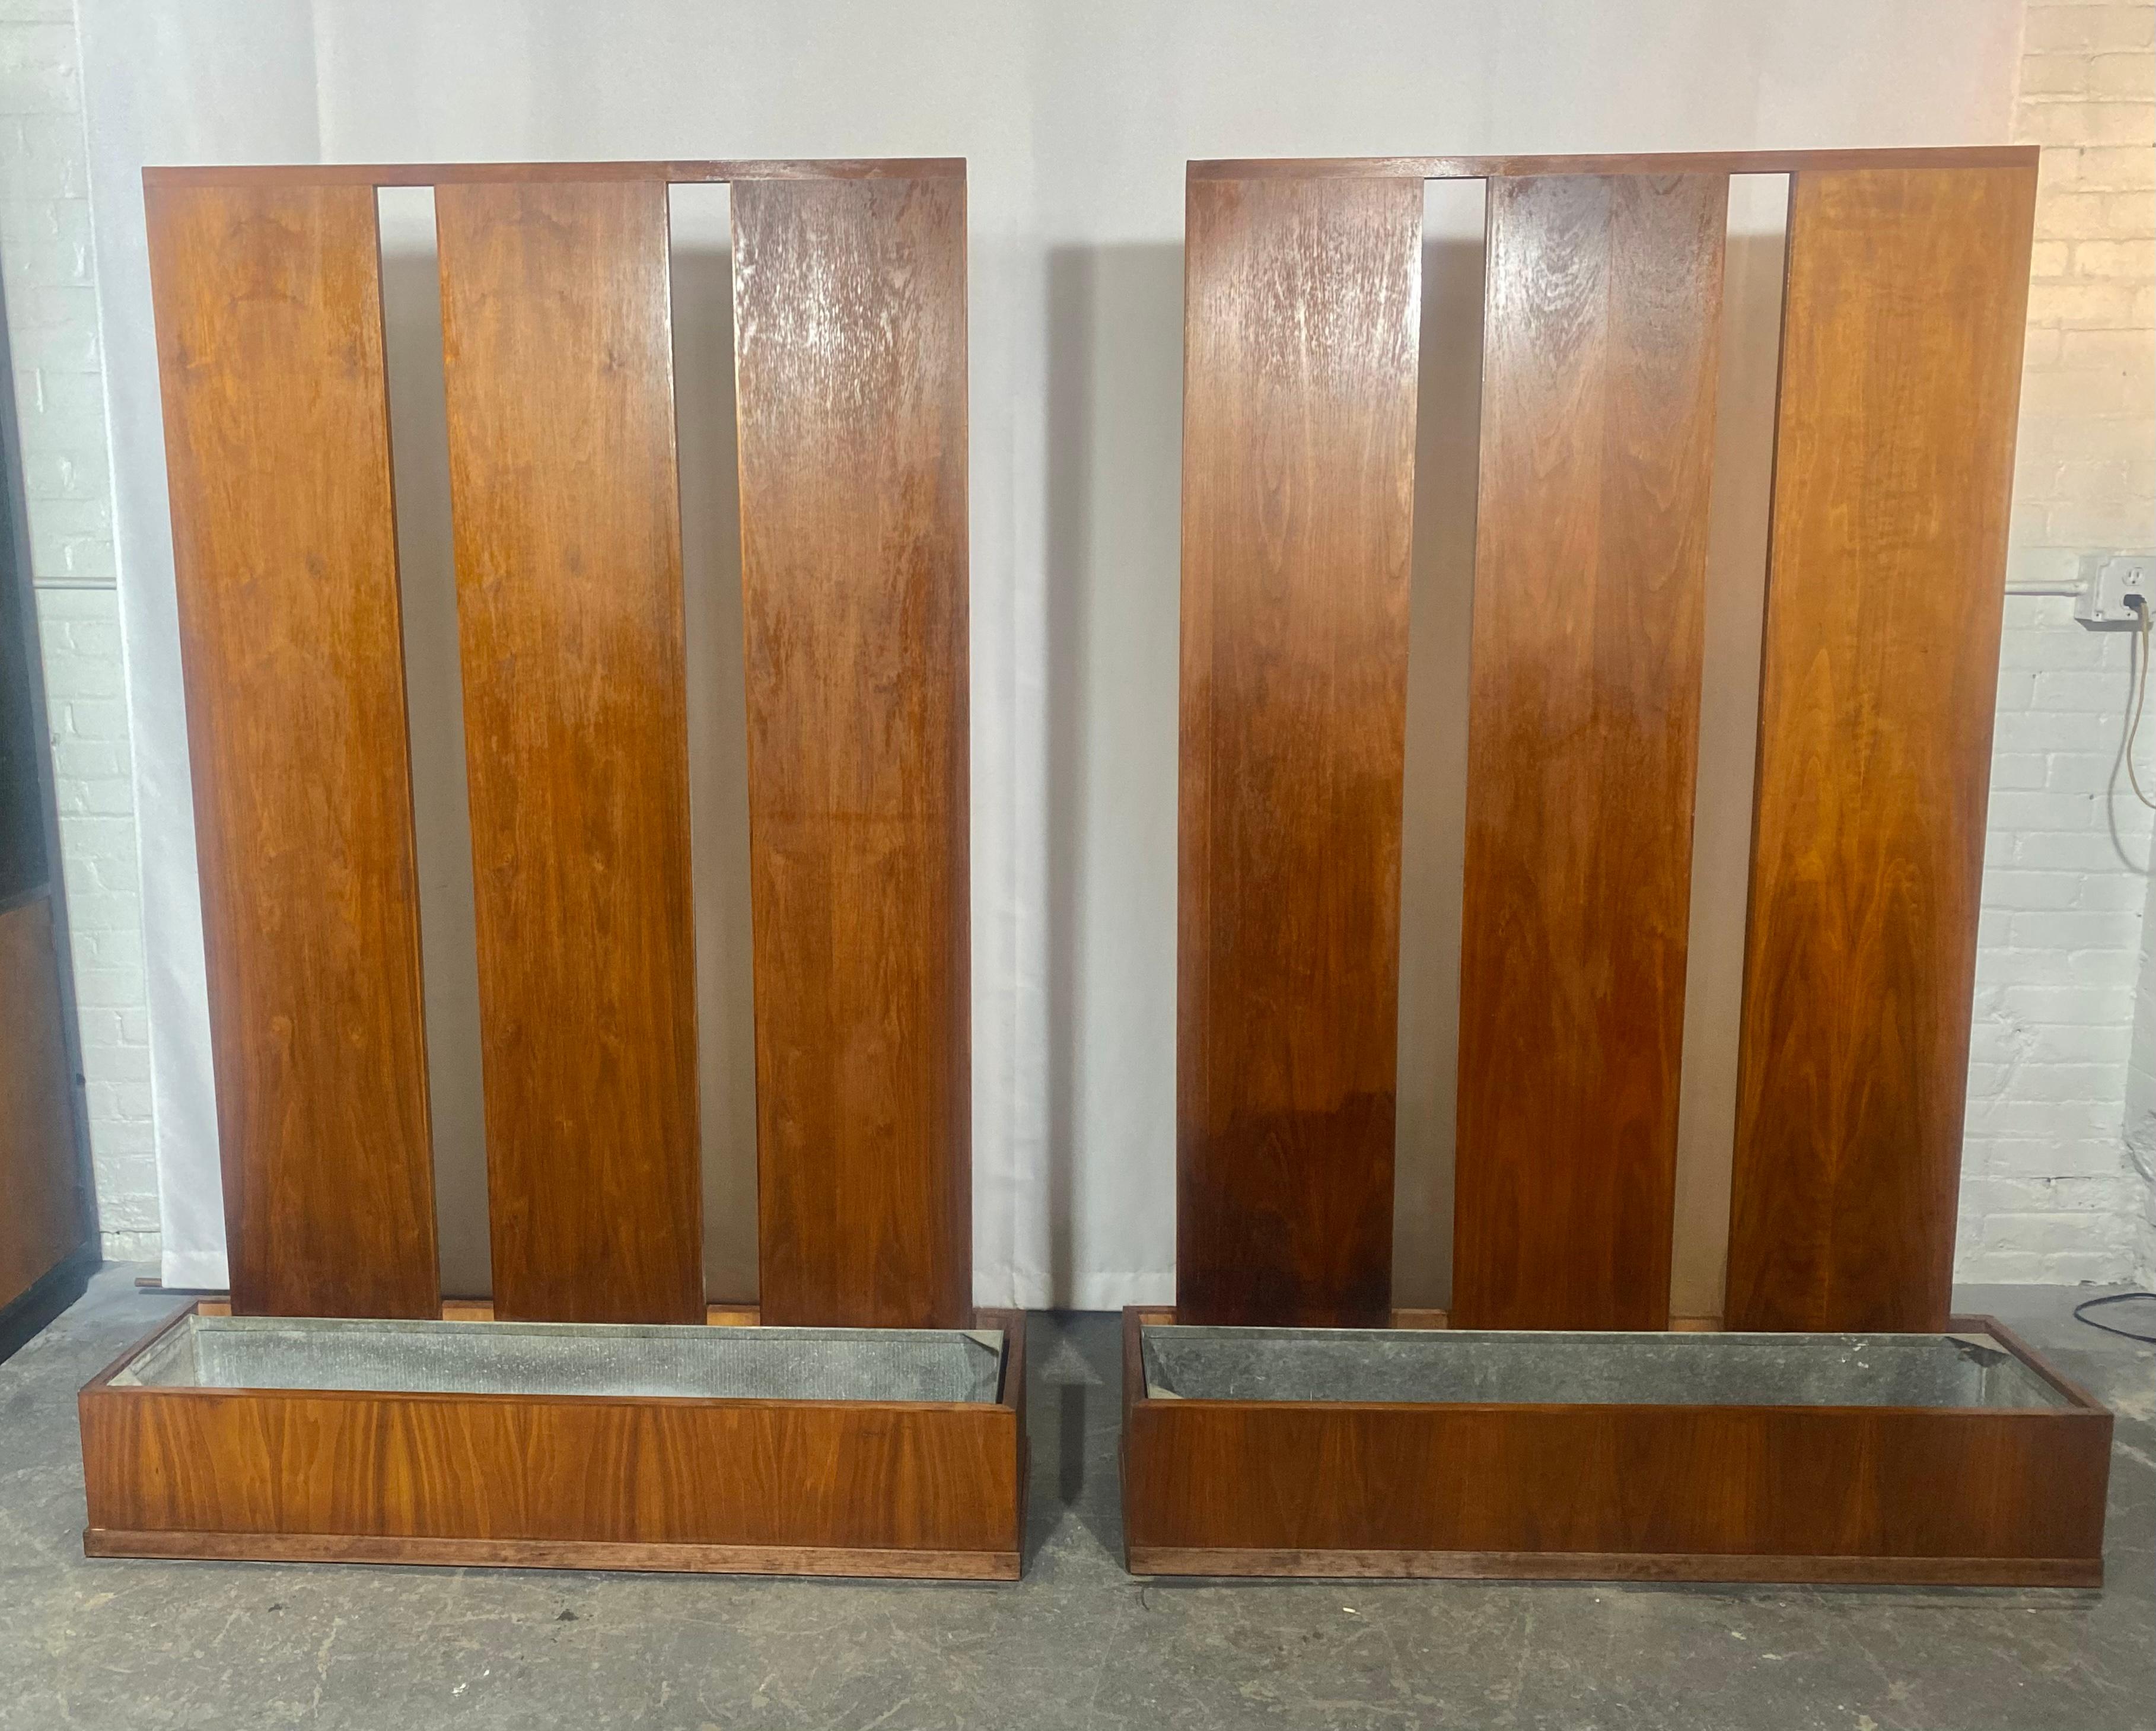 Classic Mid Century Modern Architectural Room Divider's with planter boxes For Sale 2